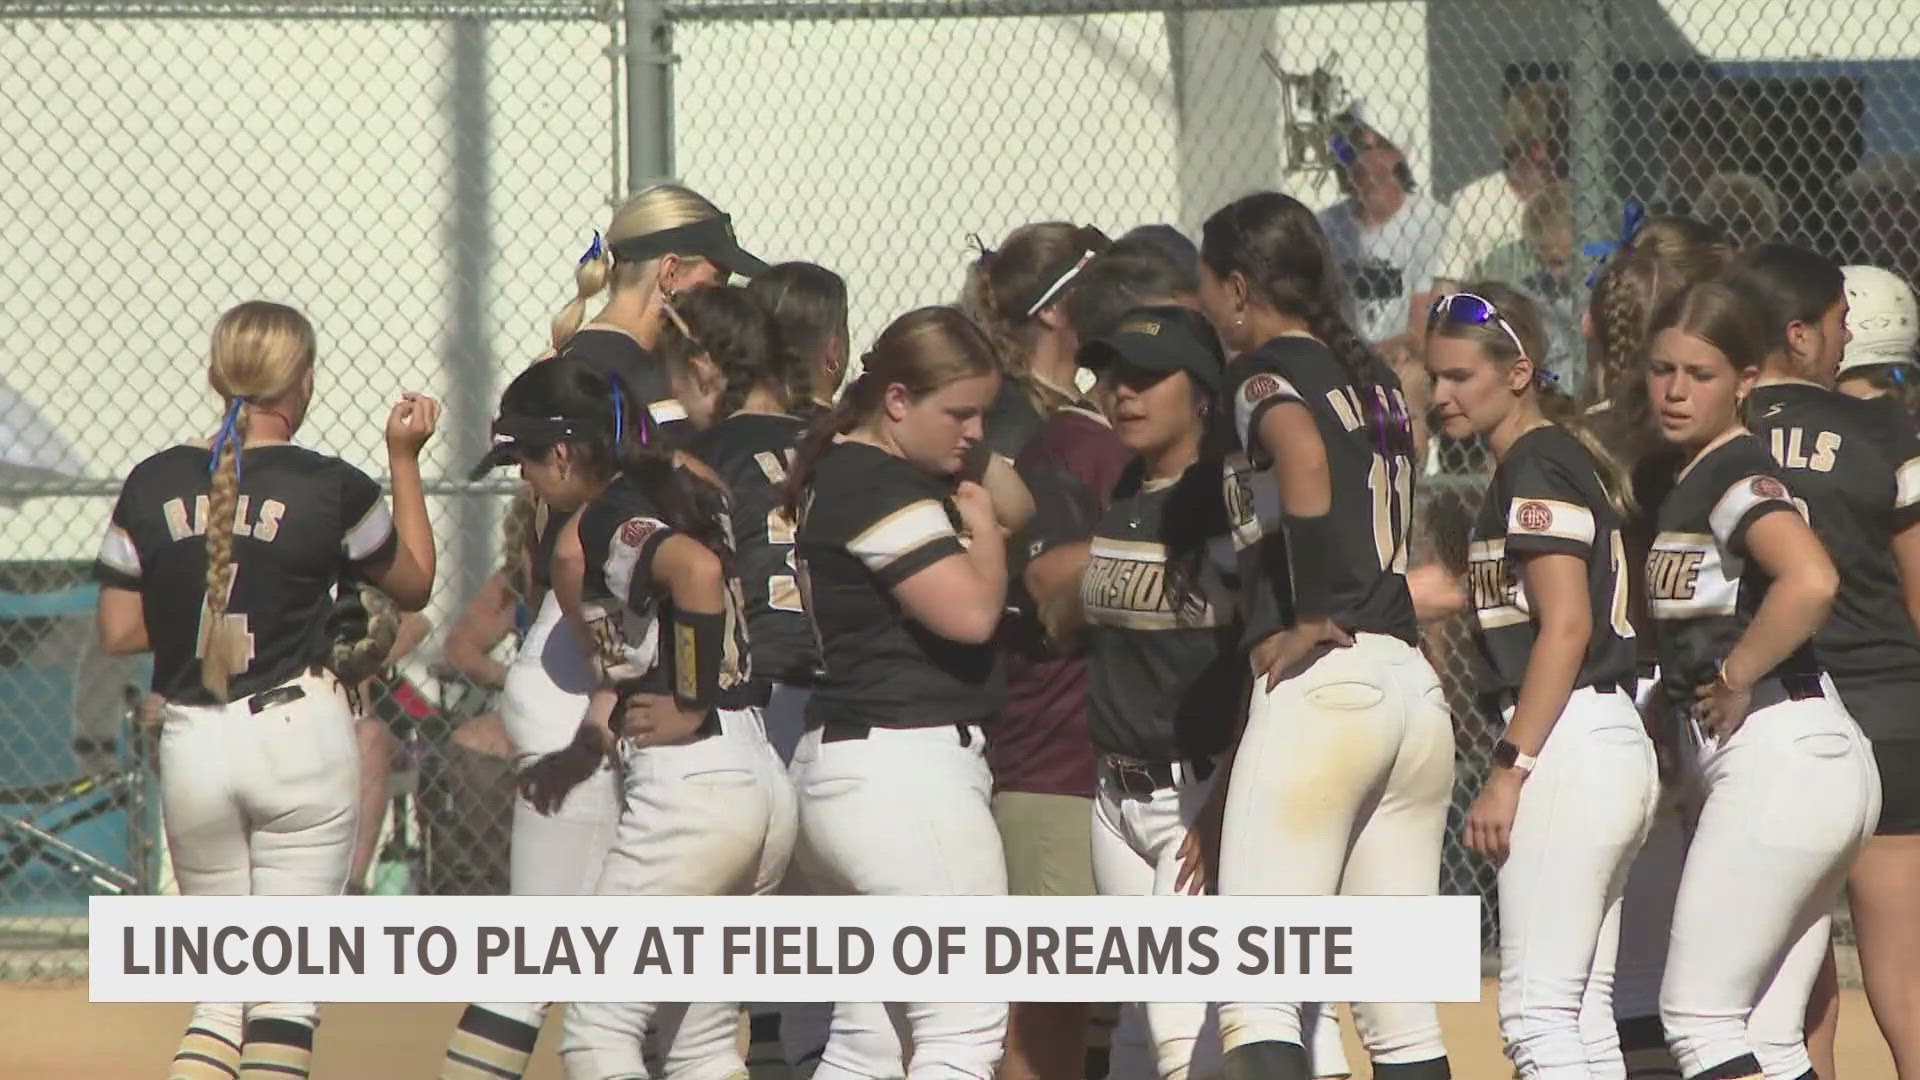 The Lincoln softball team will have a unique opportunity to play at the Field of Dreams movie site.